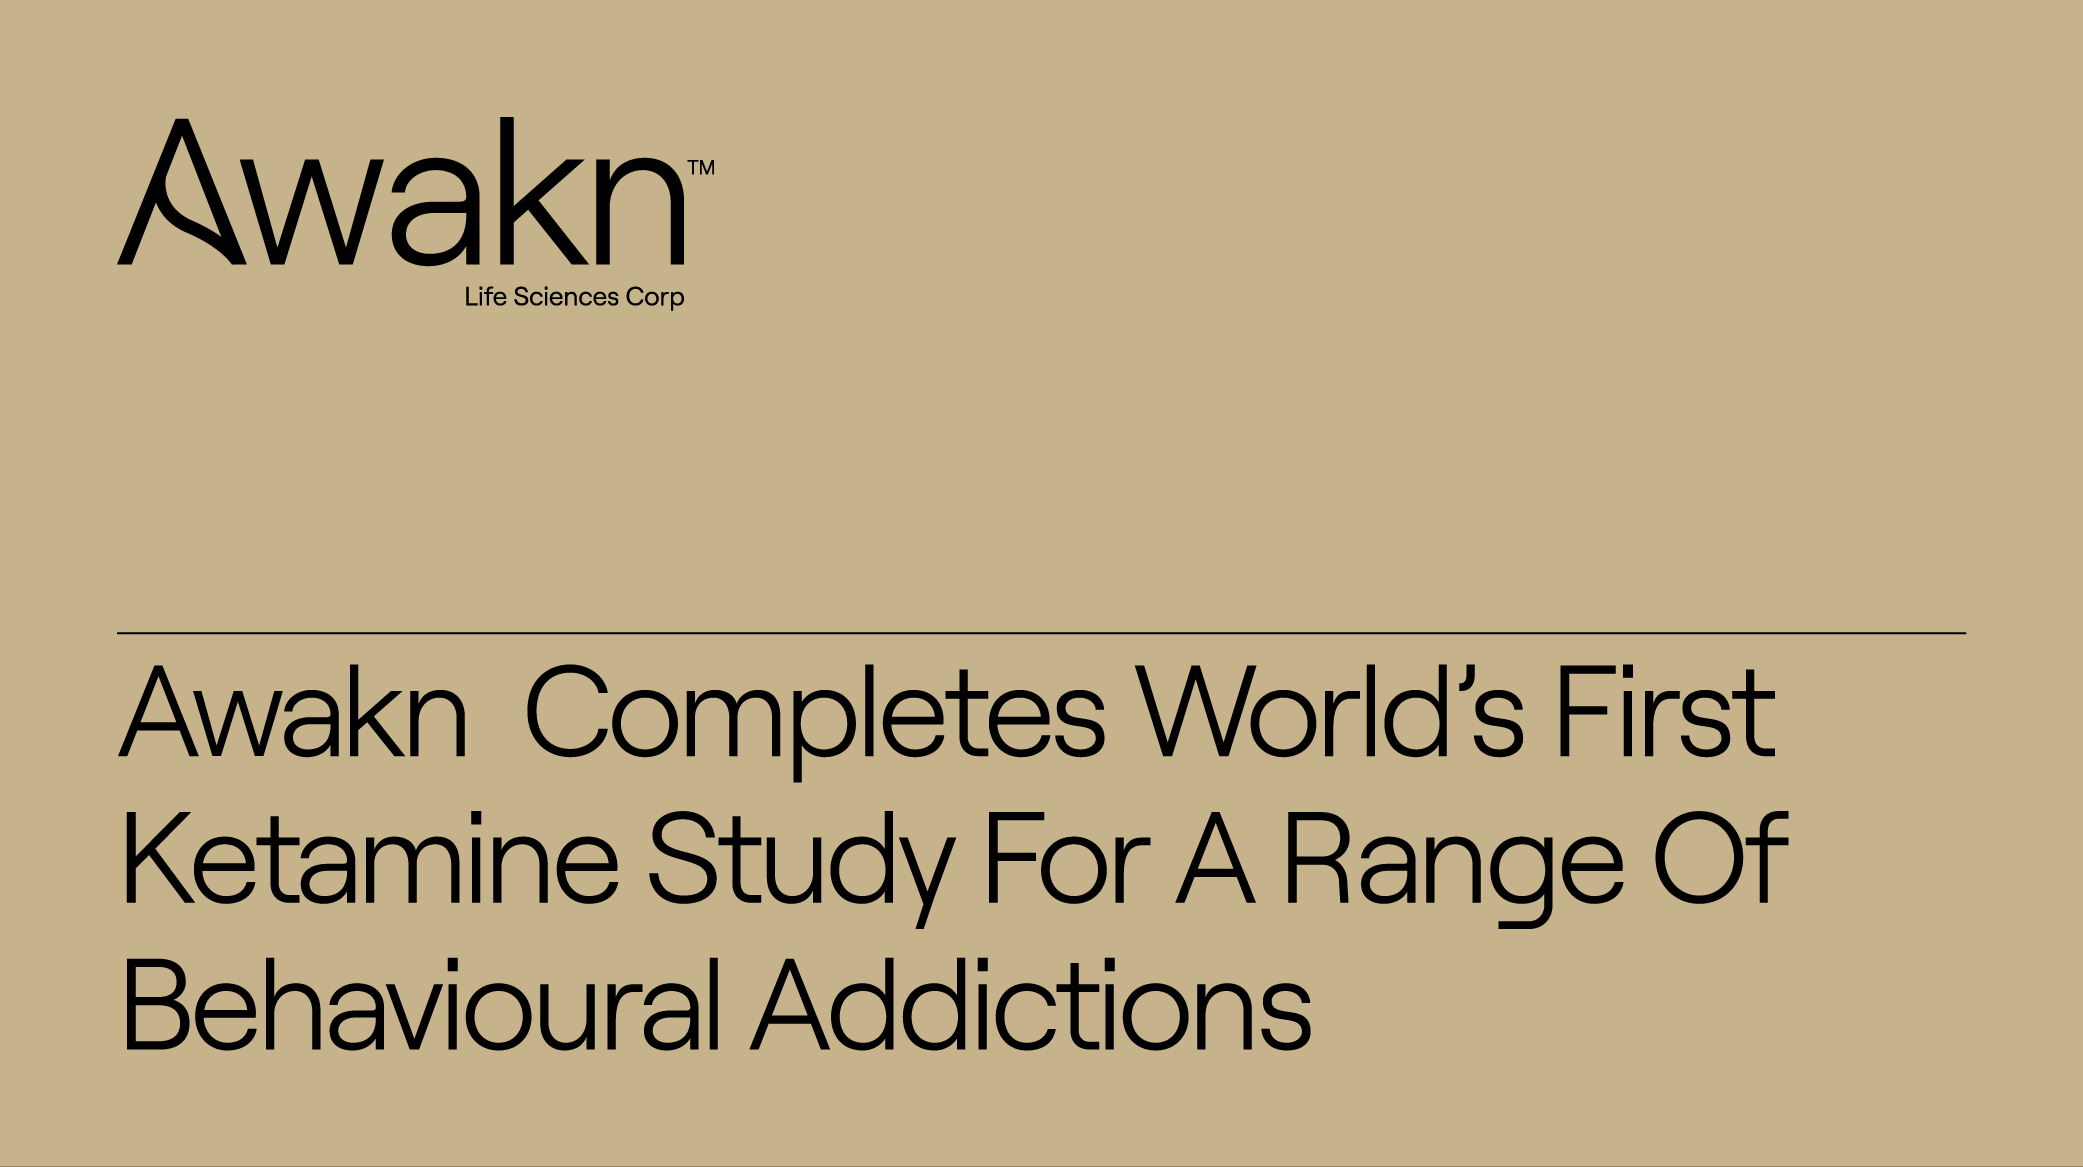 Awakn Life Sciences Completes World’s First Ketamine Study For A Range Of Behavioral Addictions